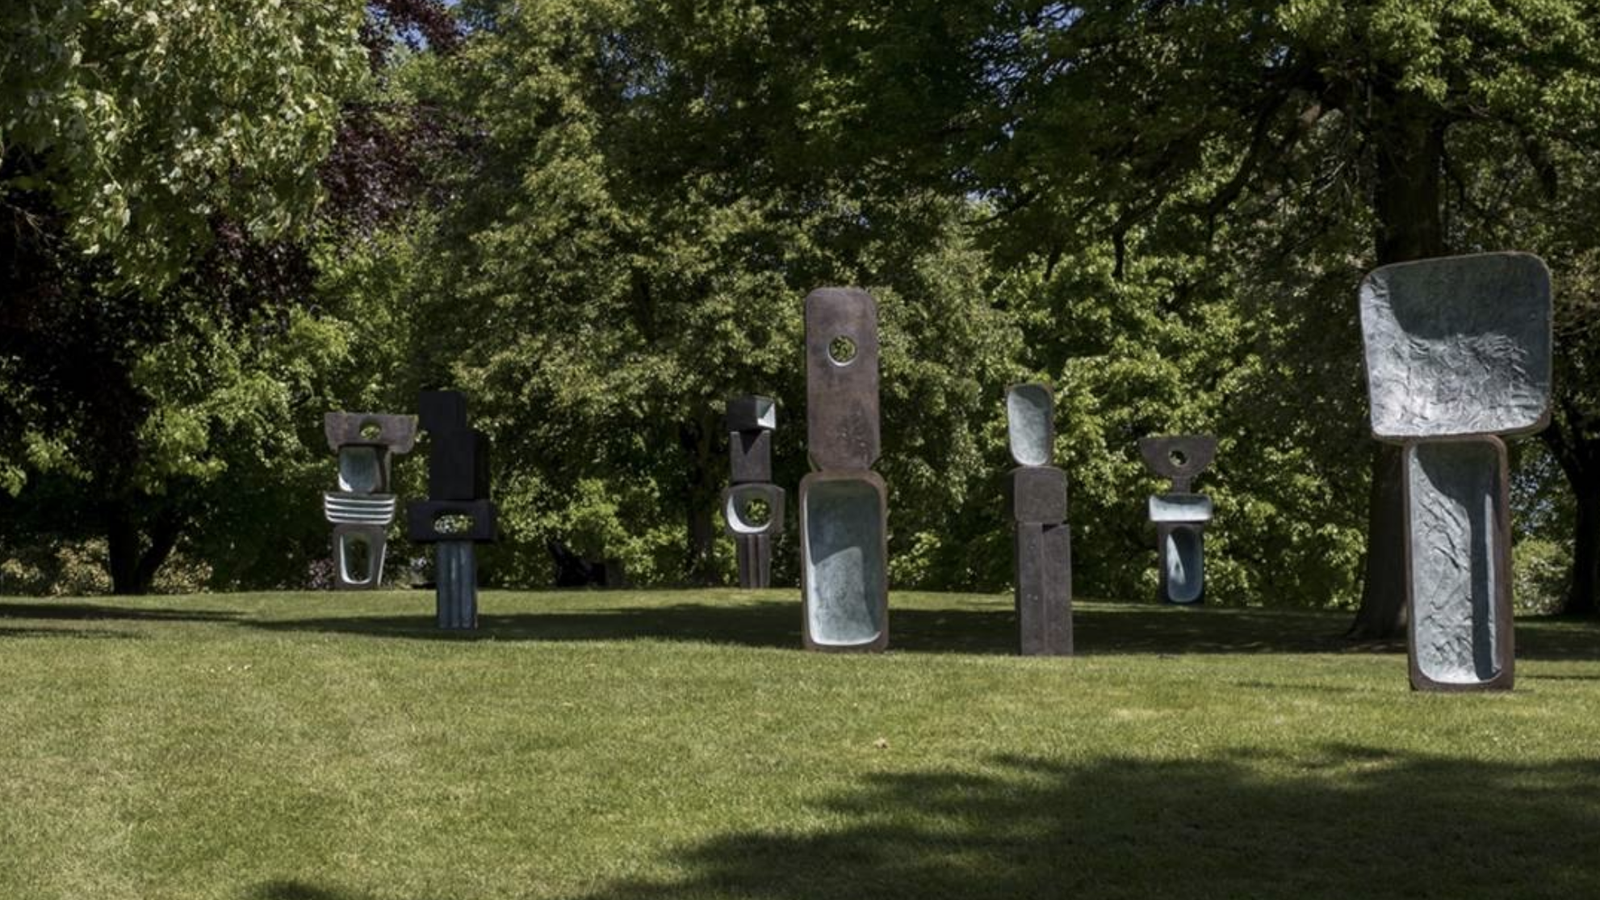 Barbara Hepworth, The Family of Man, 1970.Courtesy of Yorkshire Sculpture Park.